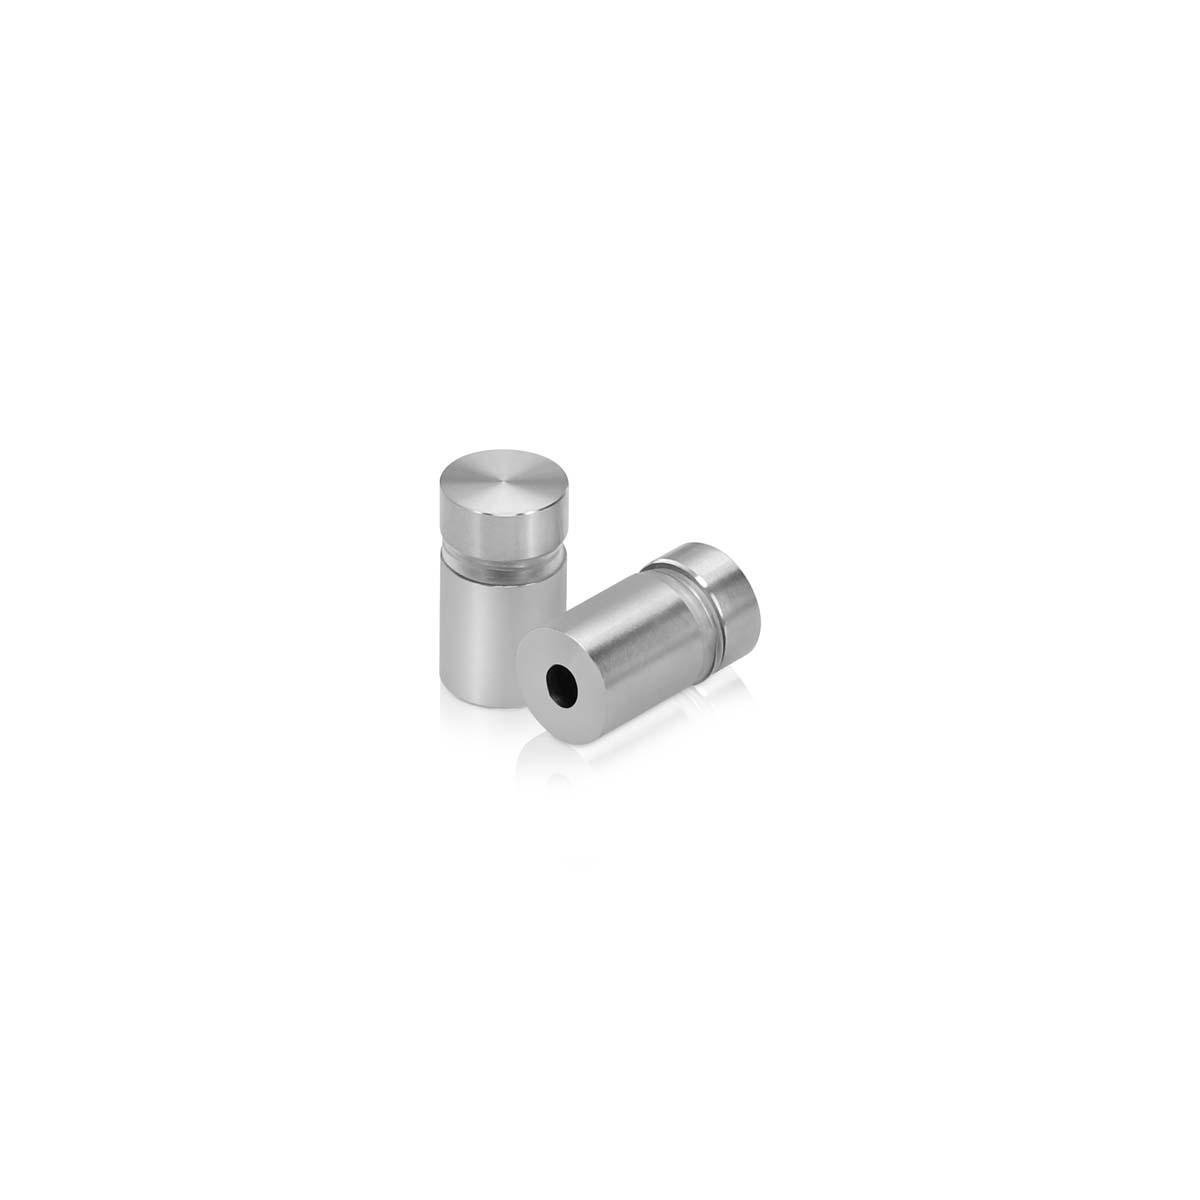 1/2'' Diameter X 1/2'' Barrel Length, Hollow Stainless Steel Brushed Finish. Easy Fasten Standoff (For Inside Use Only) [Required Material Hole Size: 3/8'']